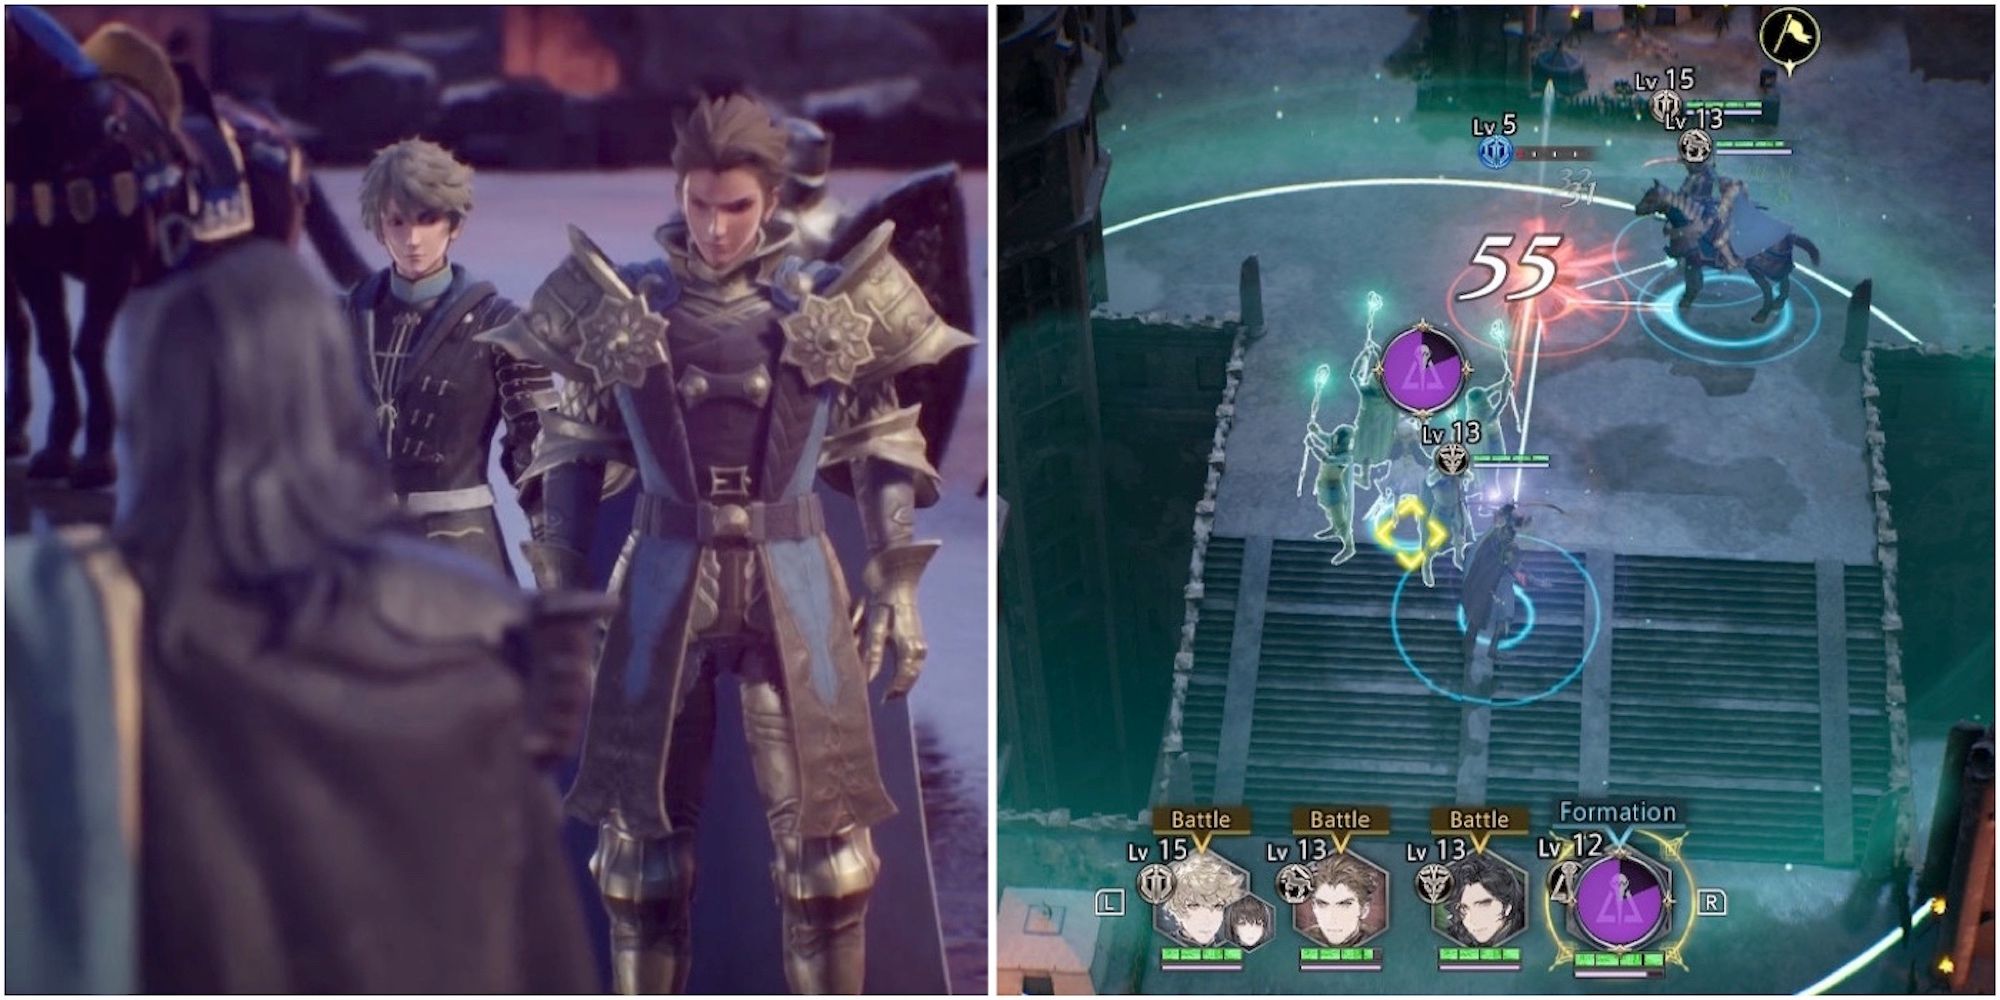 A cutscene featuring characters and fighting enemies in The Diofield Chronicle